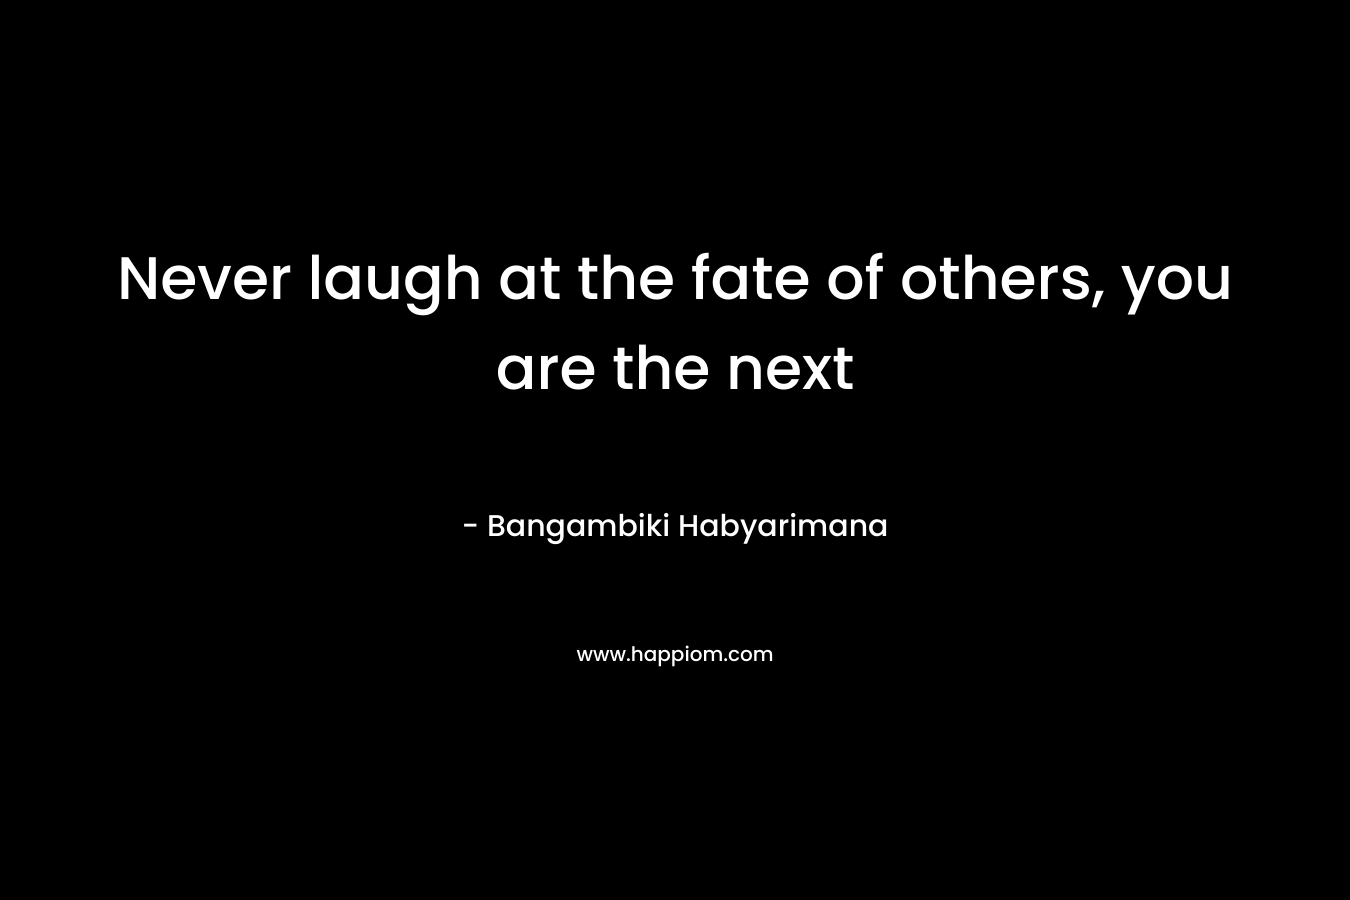 Never laugh at the fate of others, you are the next